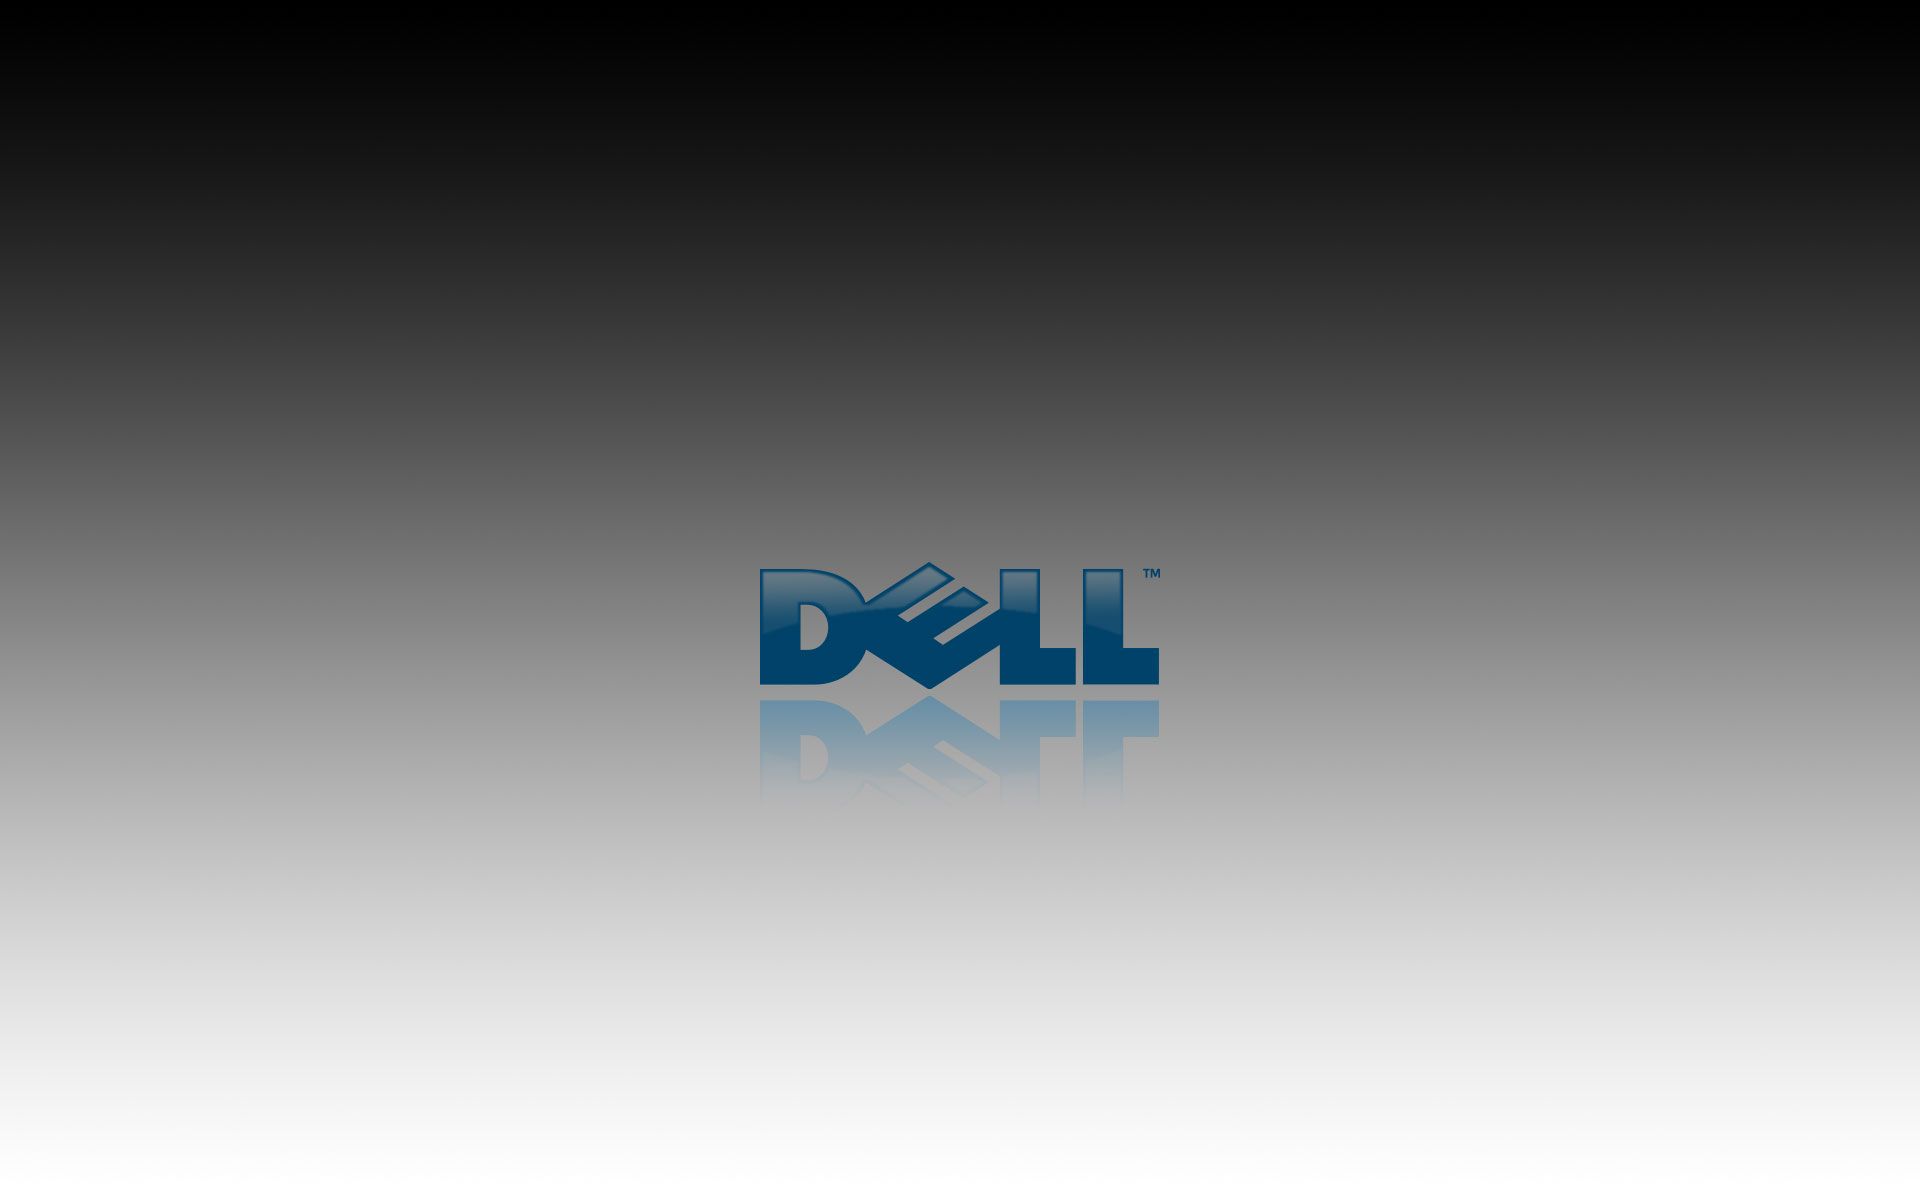 Full HD Dell Wallpapers | Full HD Pictures